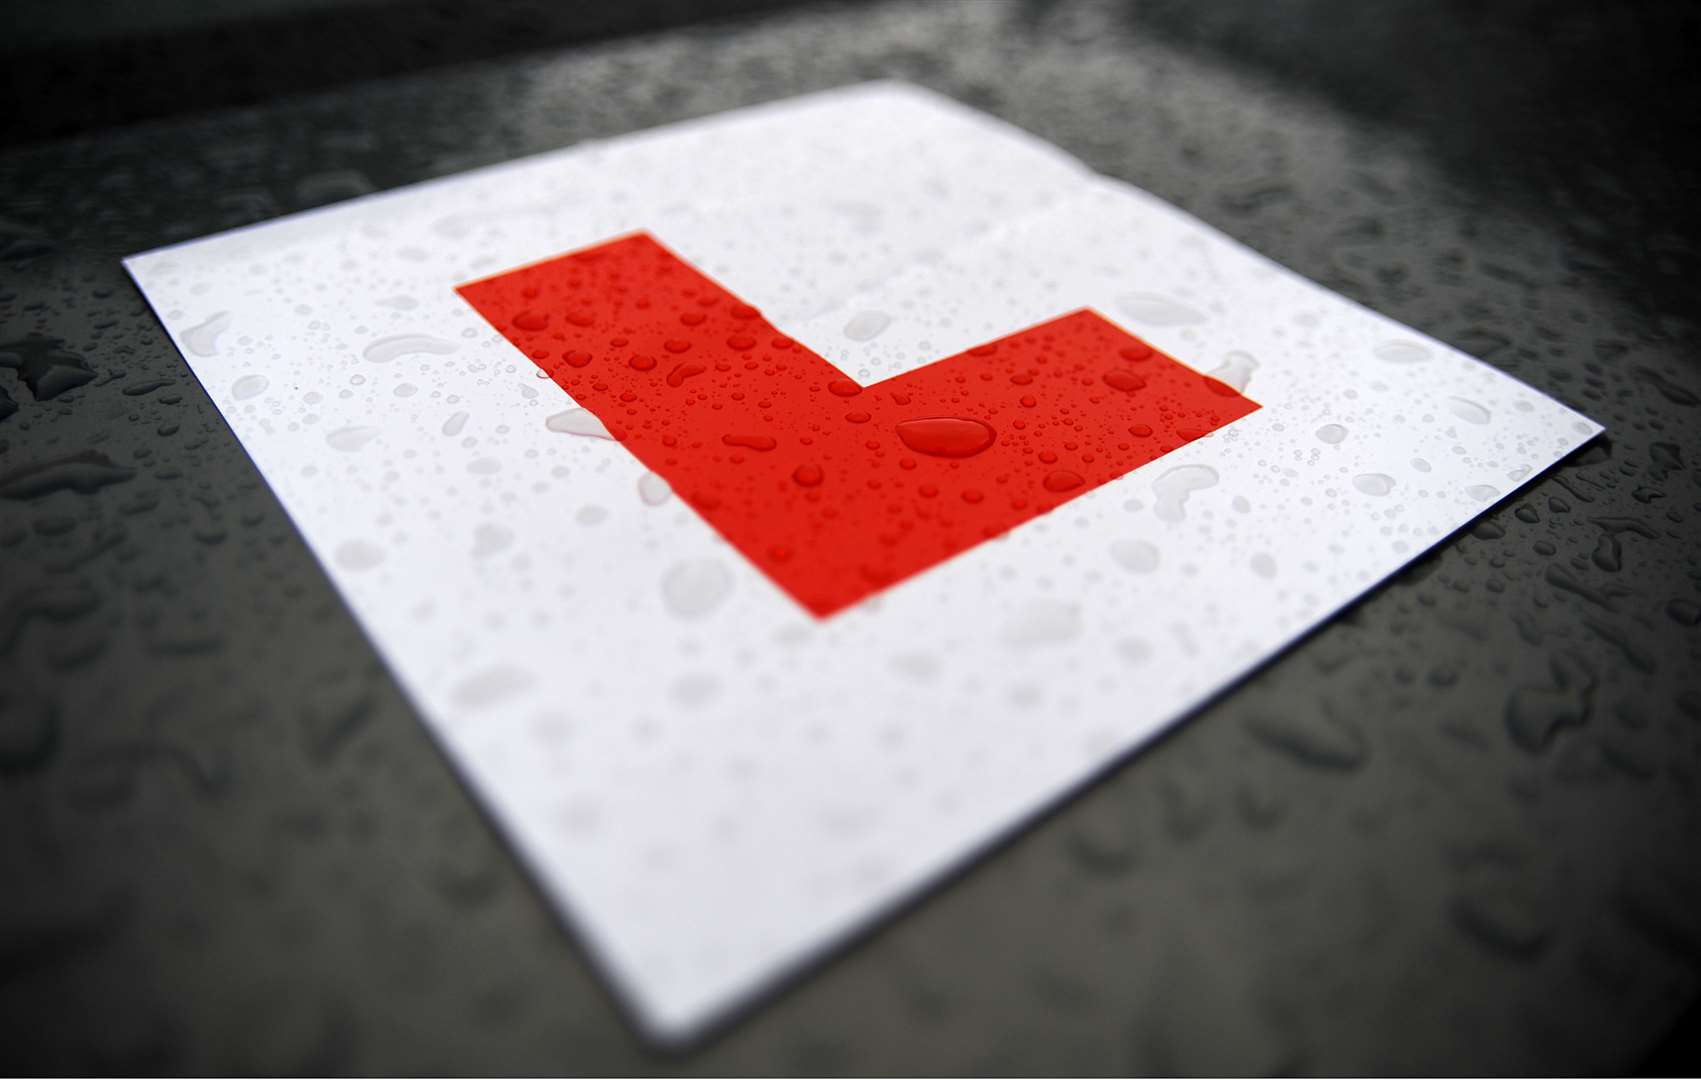 Driving tests have also been suspended for three months